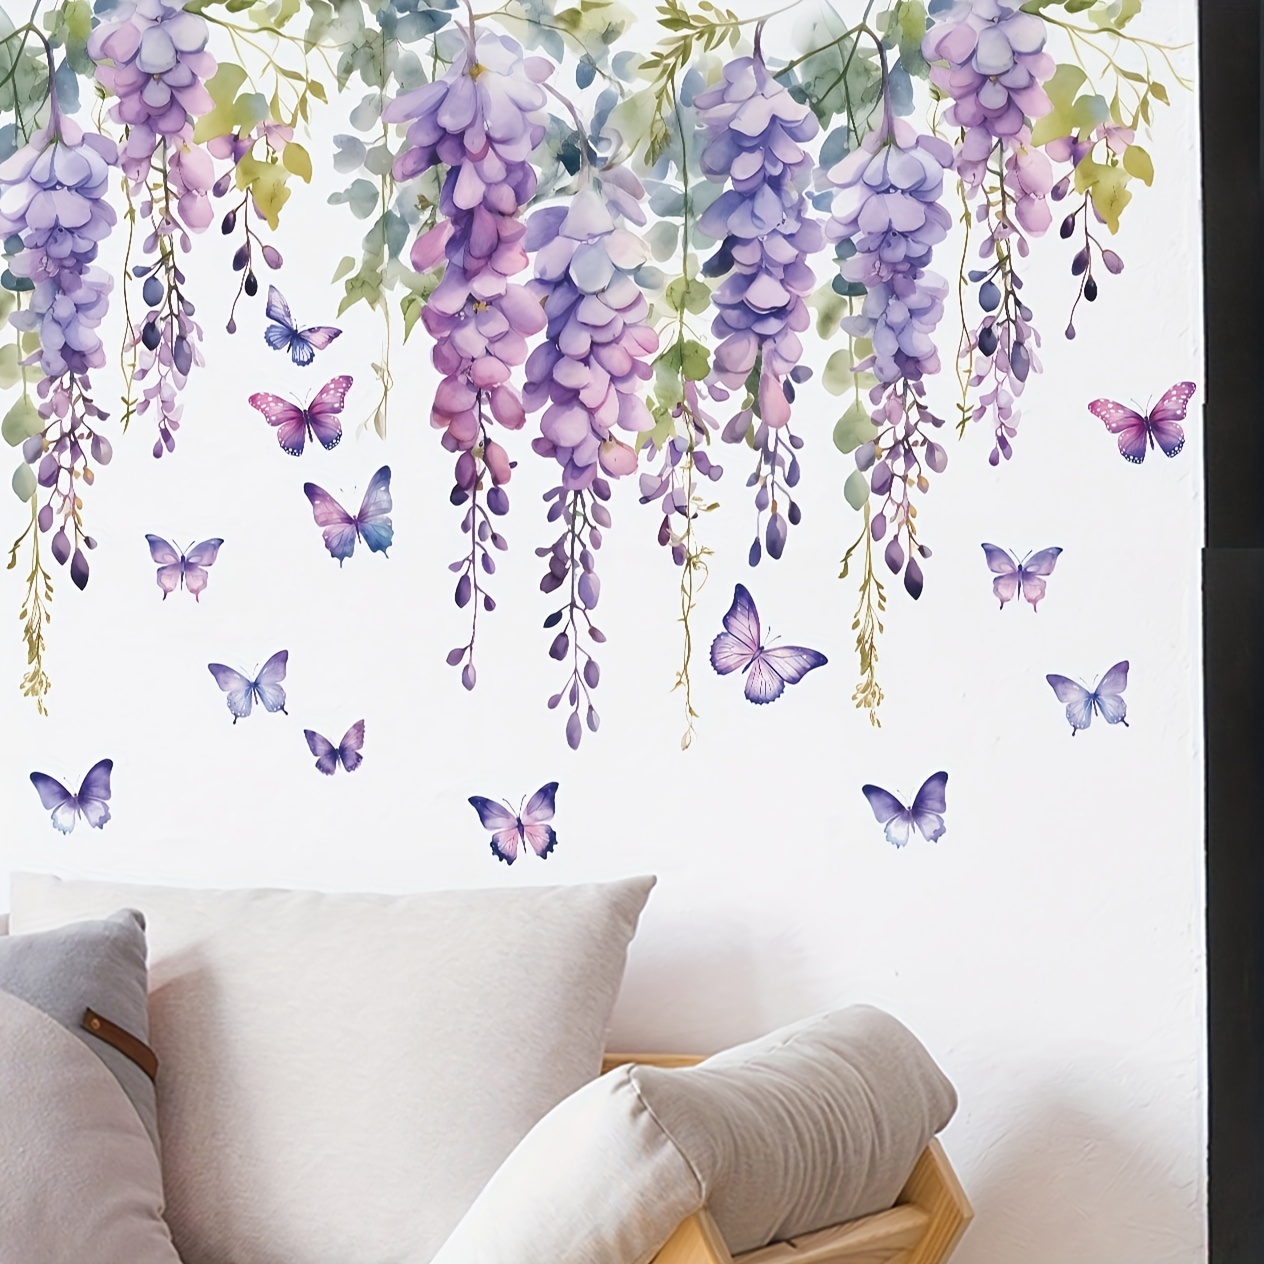 

2pcs Plant Wall Stickers, Purple Vine Flower Butterfly, Removable Waterproof Vinyl Stickers, Stickers For Living Room Office Vanity Background Wall Decor, Home Decor, 11.8*35.4in*2pcs